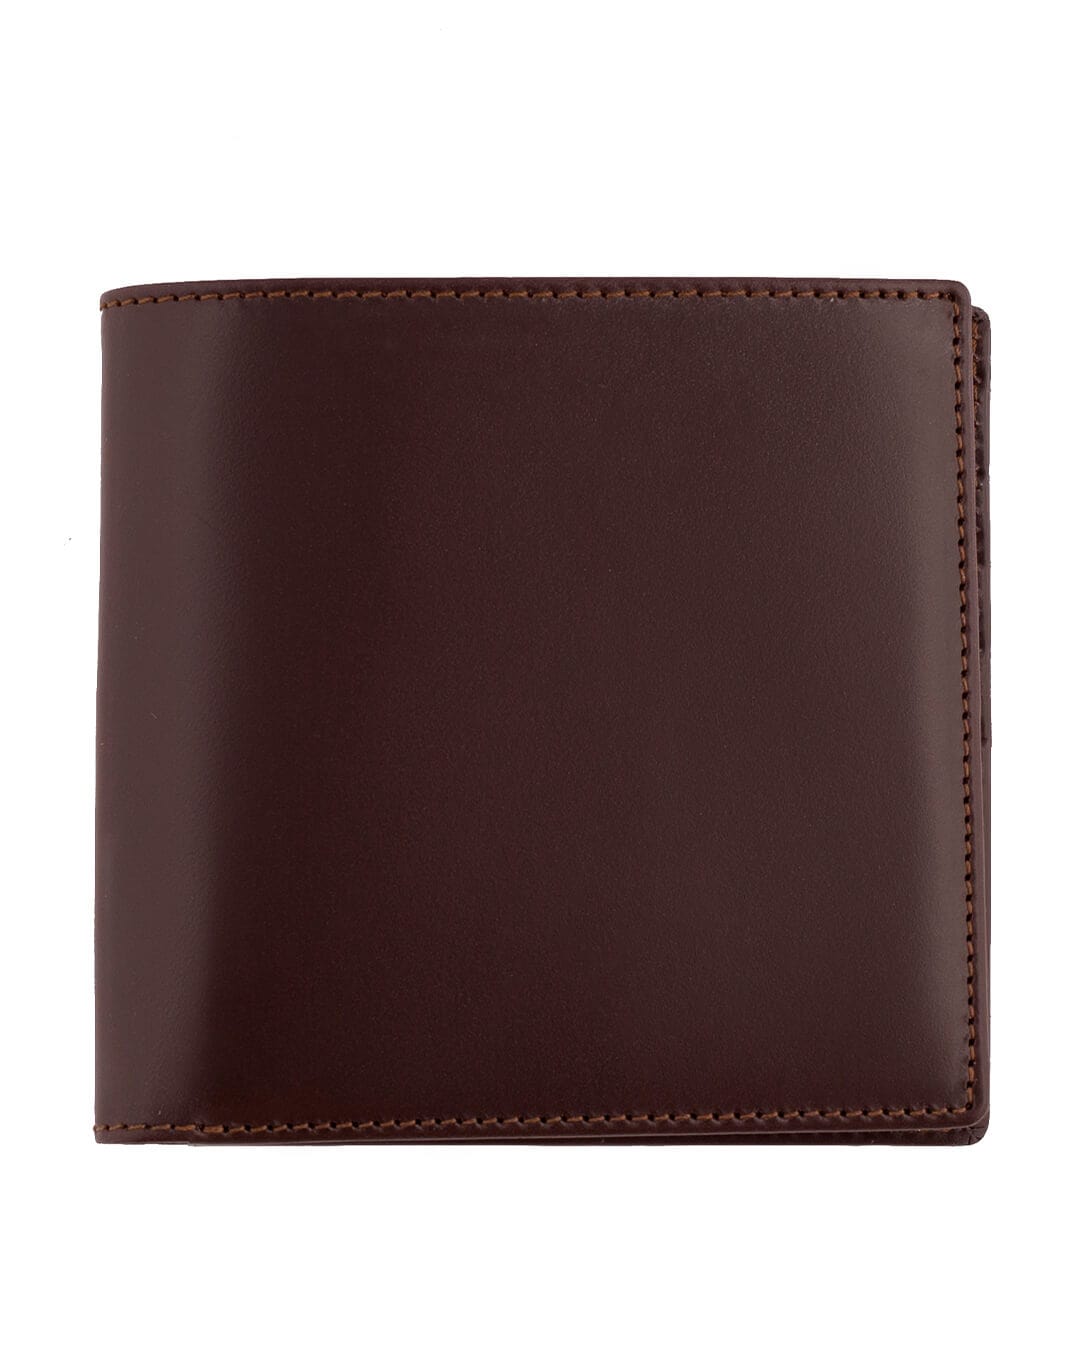 Cavesson's Wallets Cavesson's Brown And Orange Note Wallet